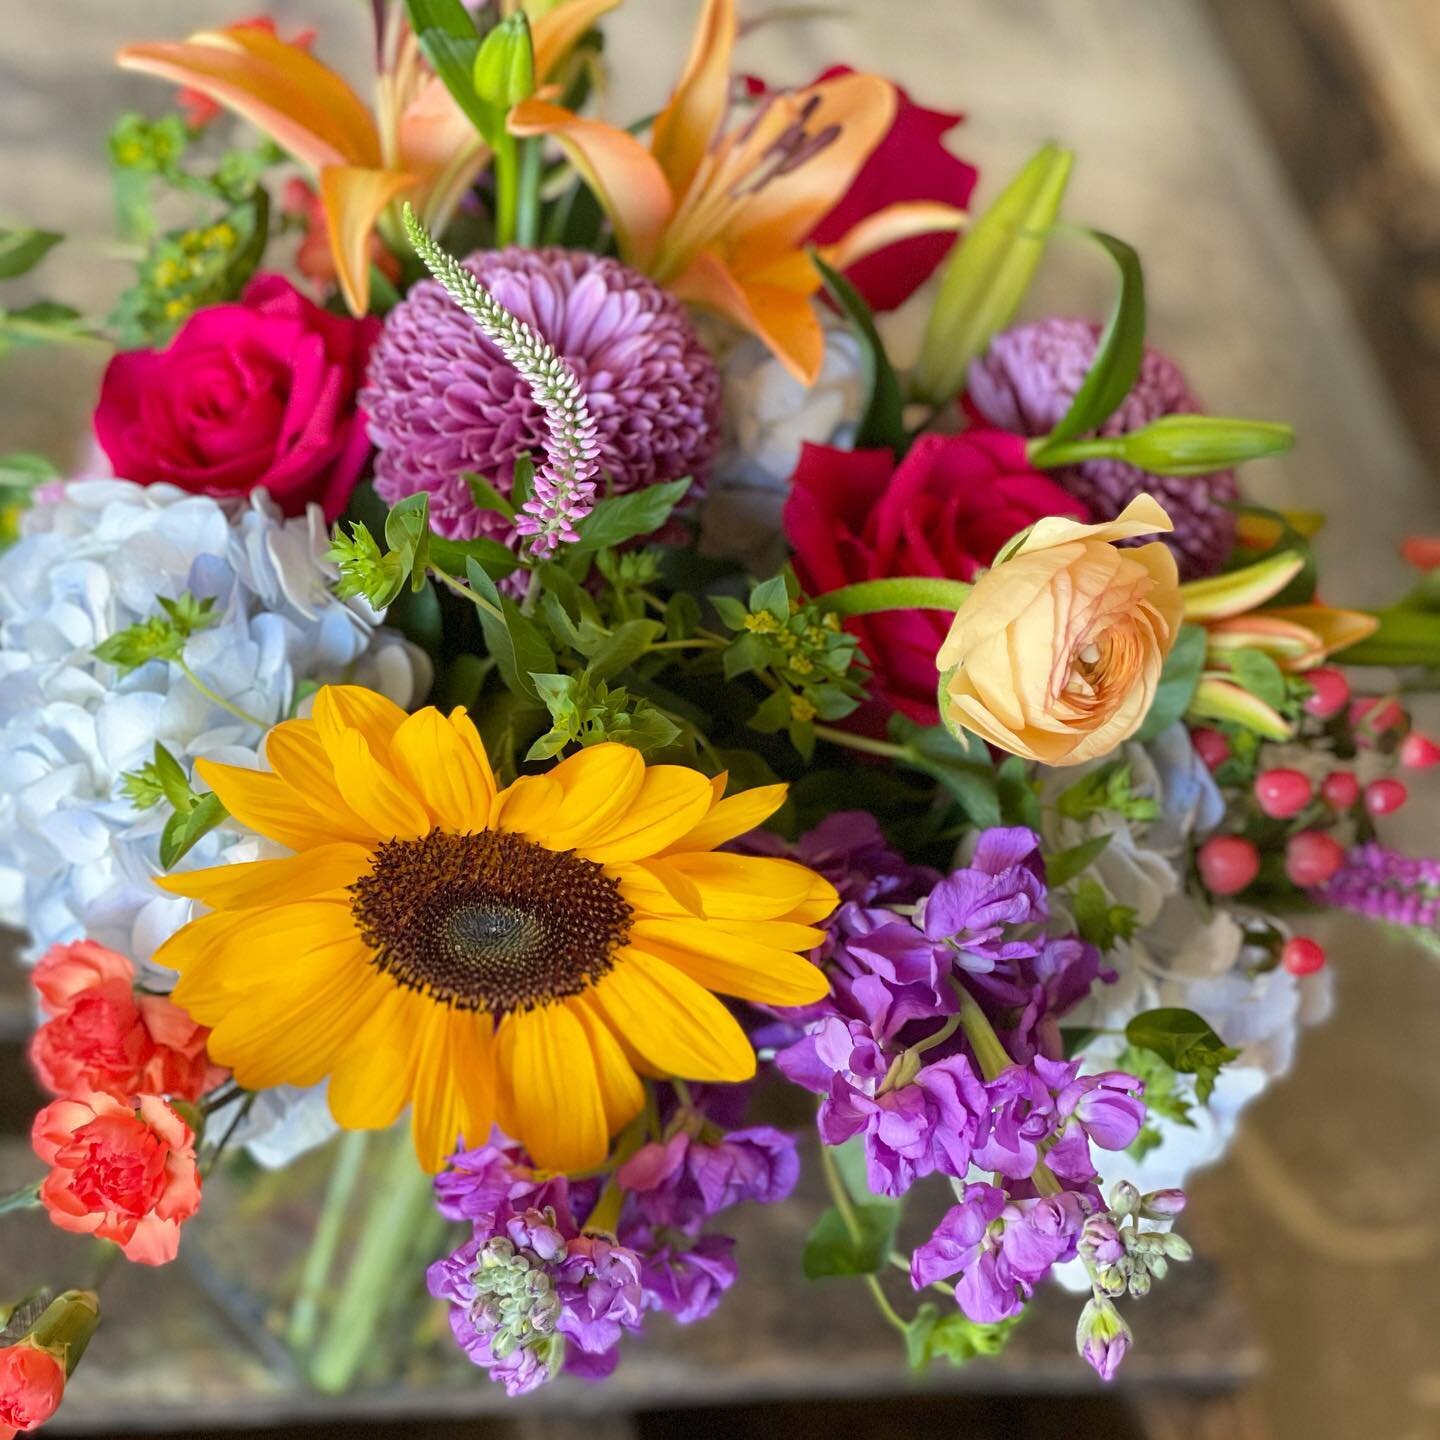 Pretty created by @adornfloraldesign with beautiful, bright colors. Thank you for visiting the @kcbloomhub!! #kcbloomhubpitstop #giveflowers #floraldesign #color